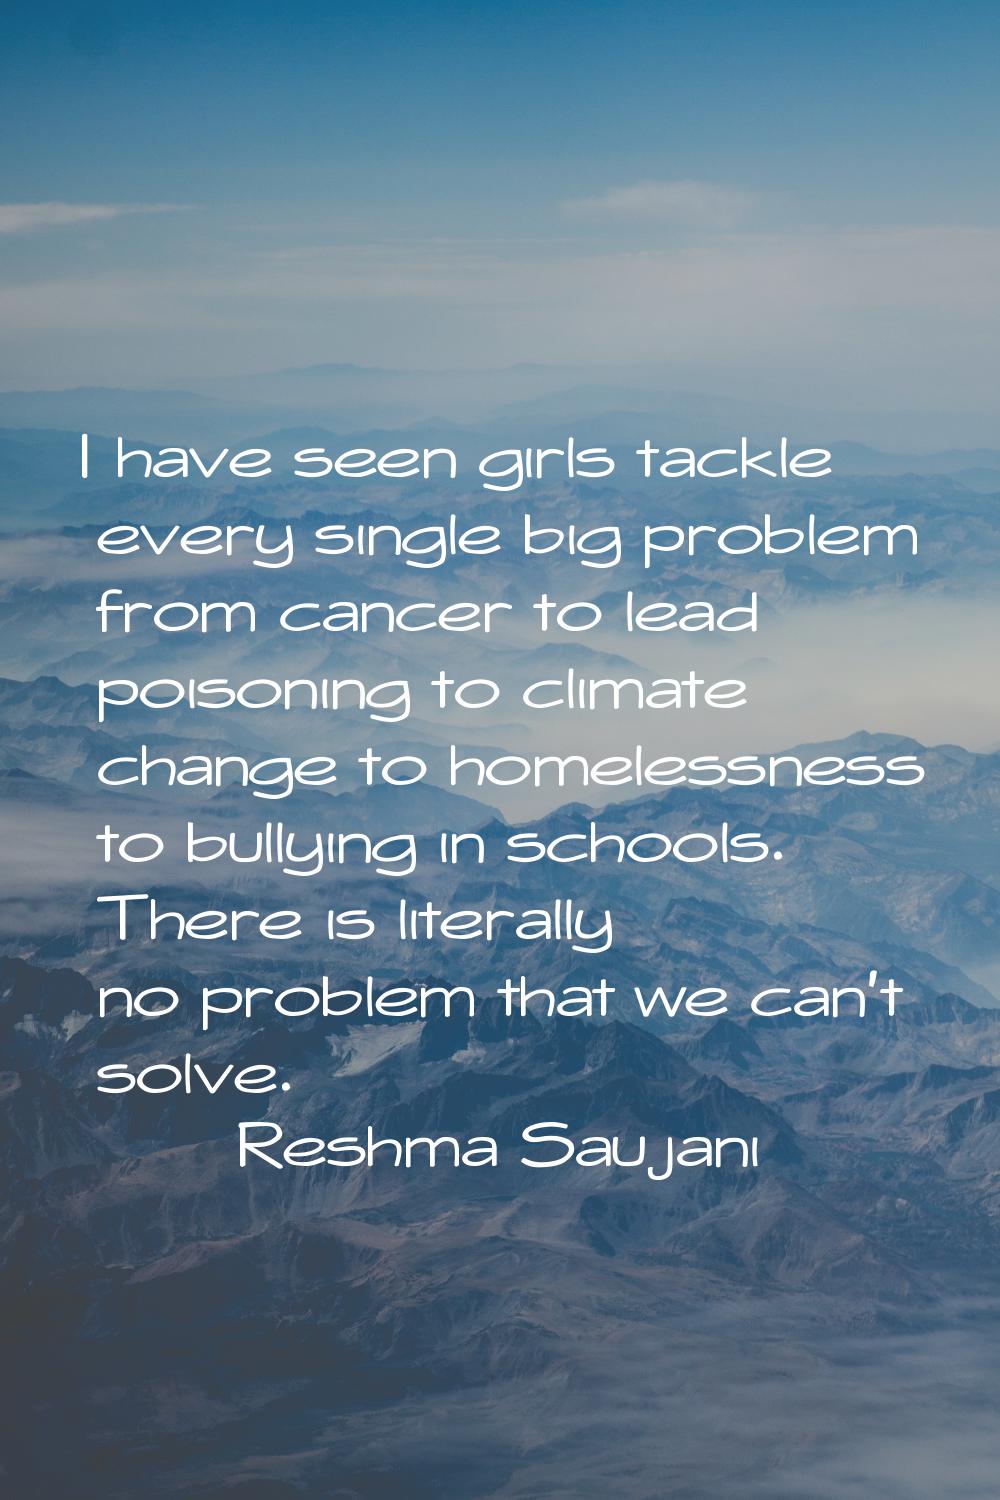 I have seen girls tackle every single big problem from cancer to lead poisoning to climate change t